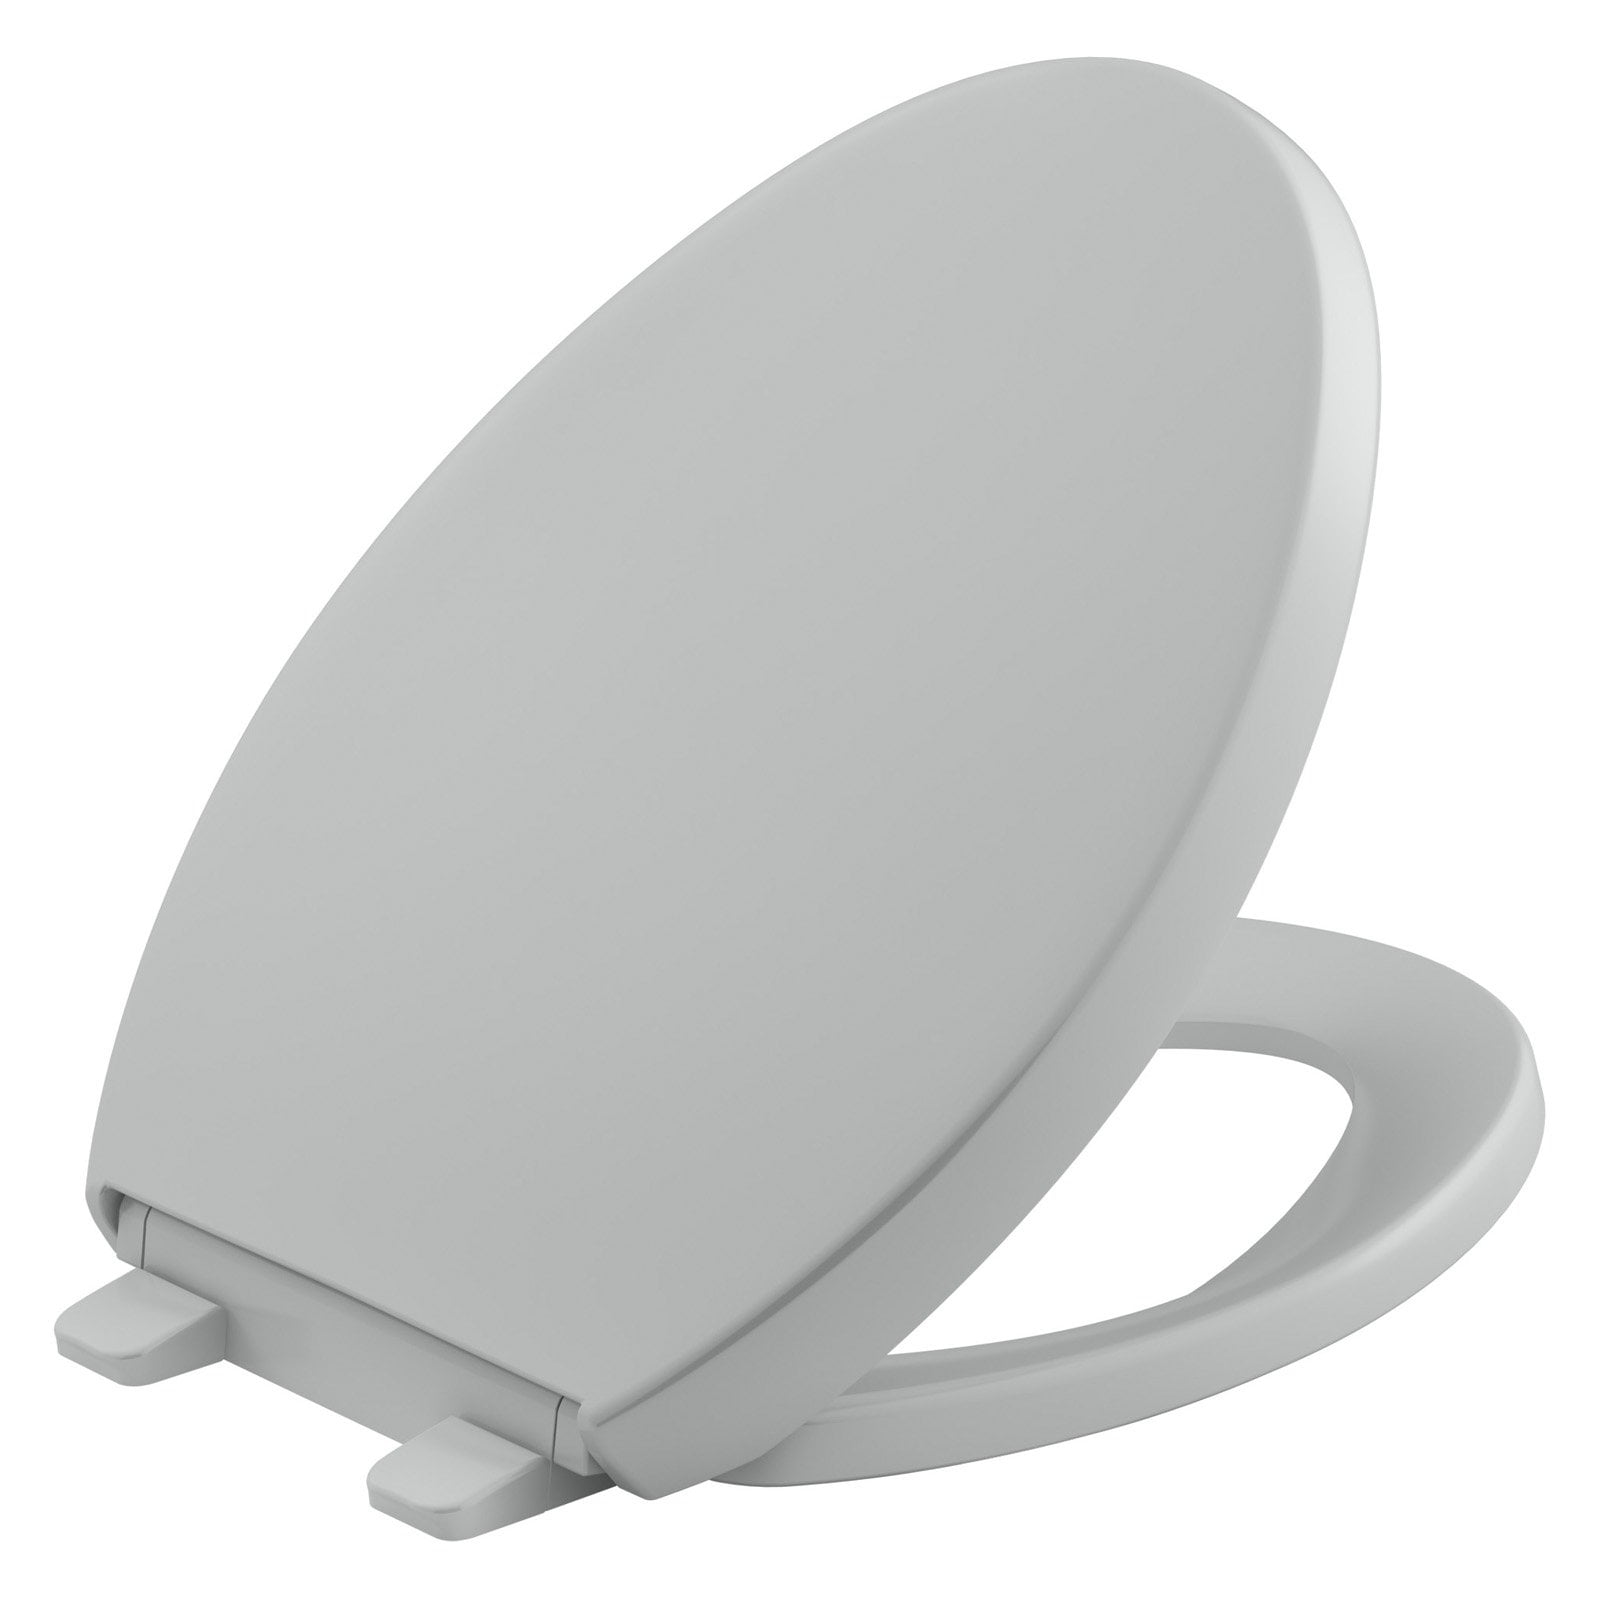 Photo 1 of Kohler Reveal Quiet Close Elongated Toilet Seat with Grip Tight Bumpers